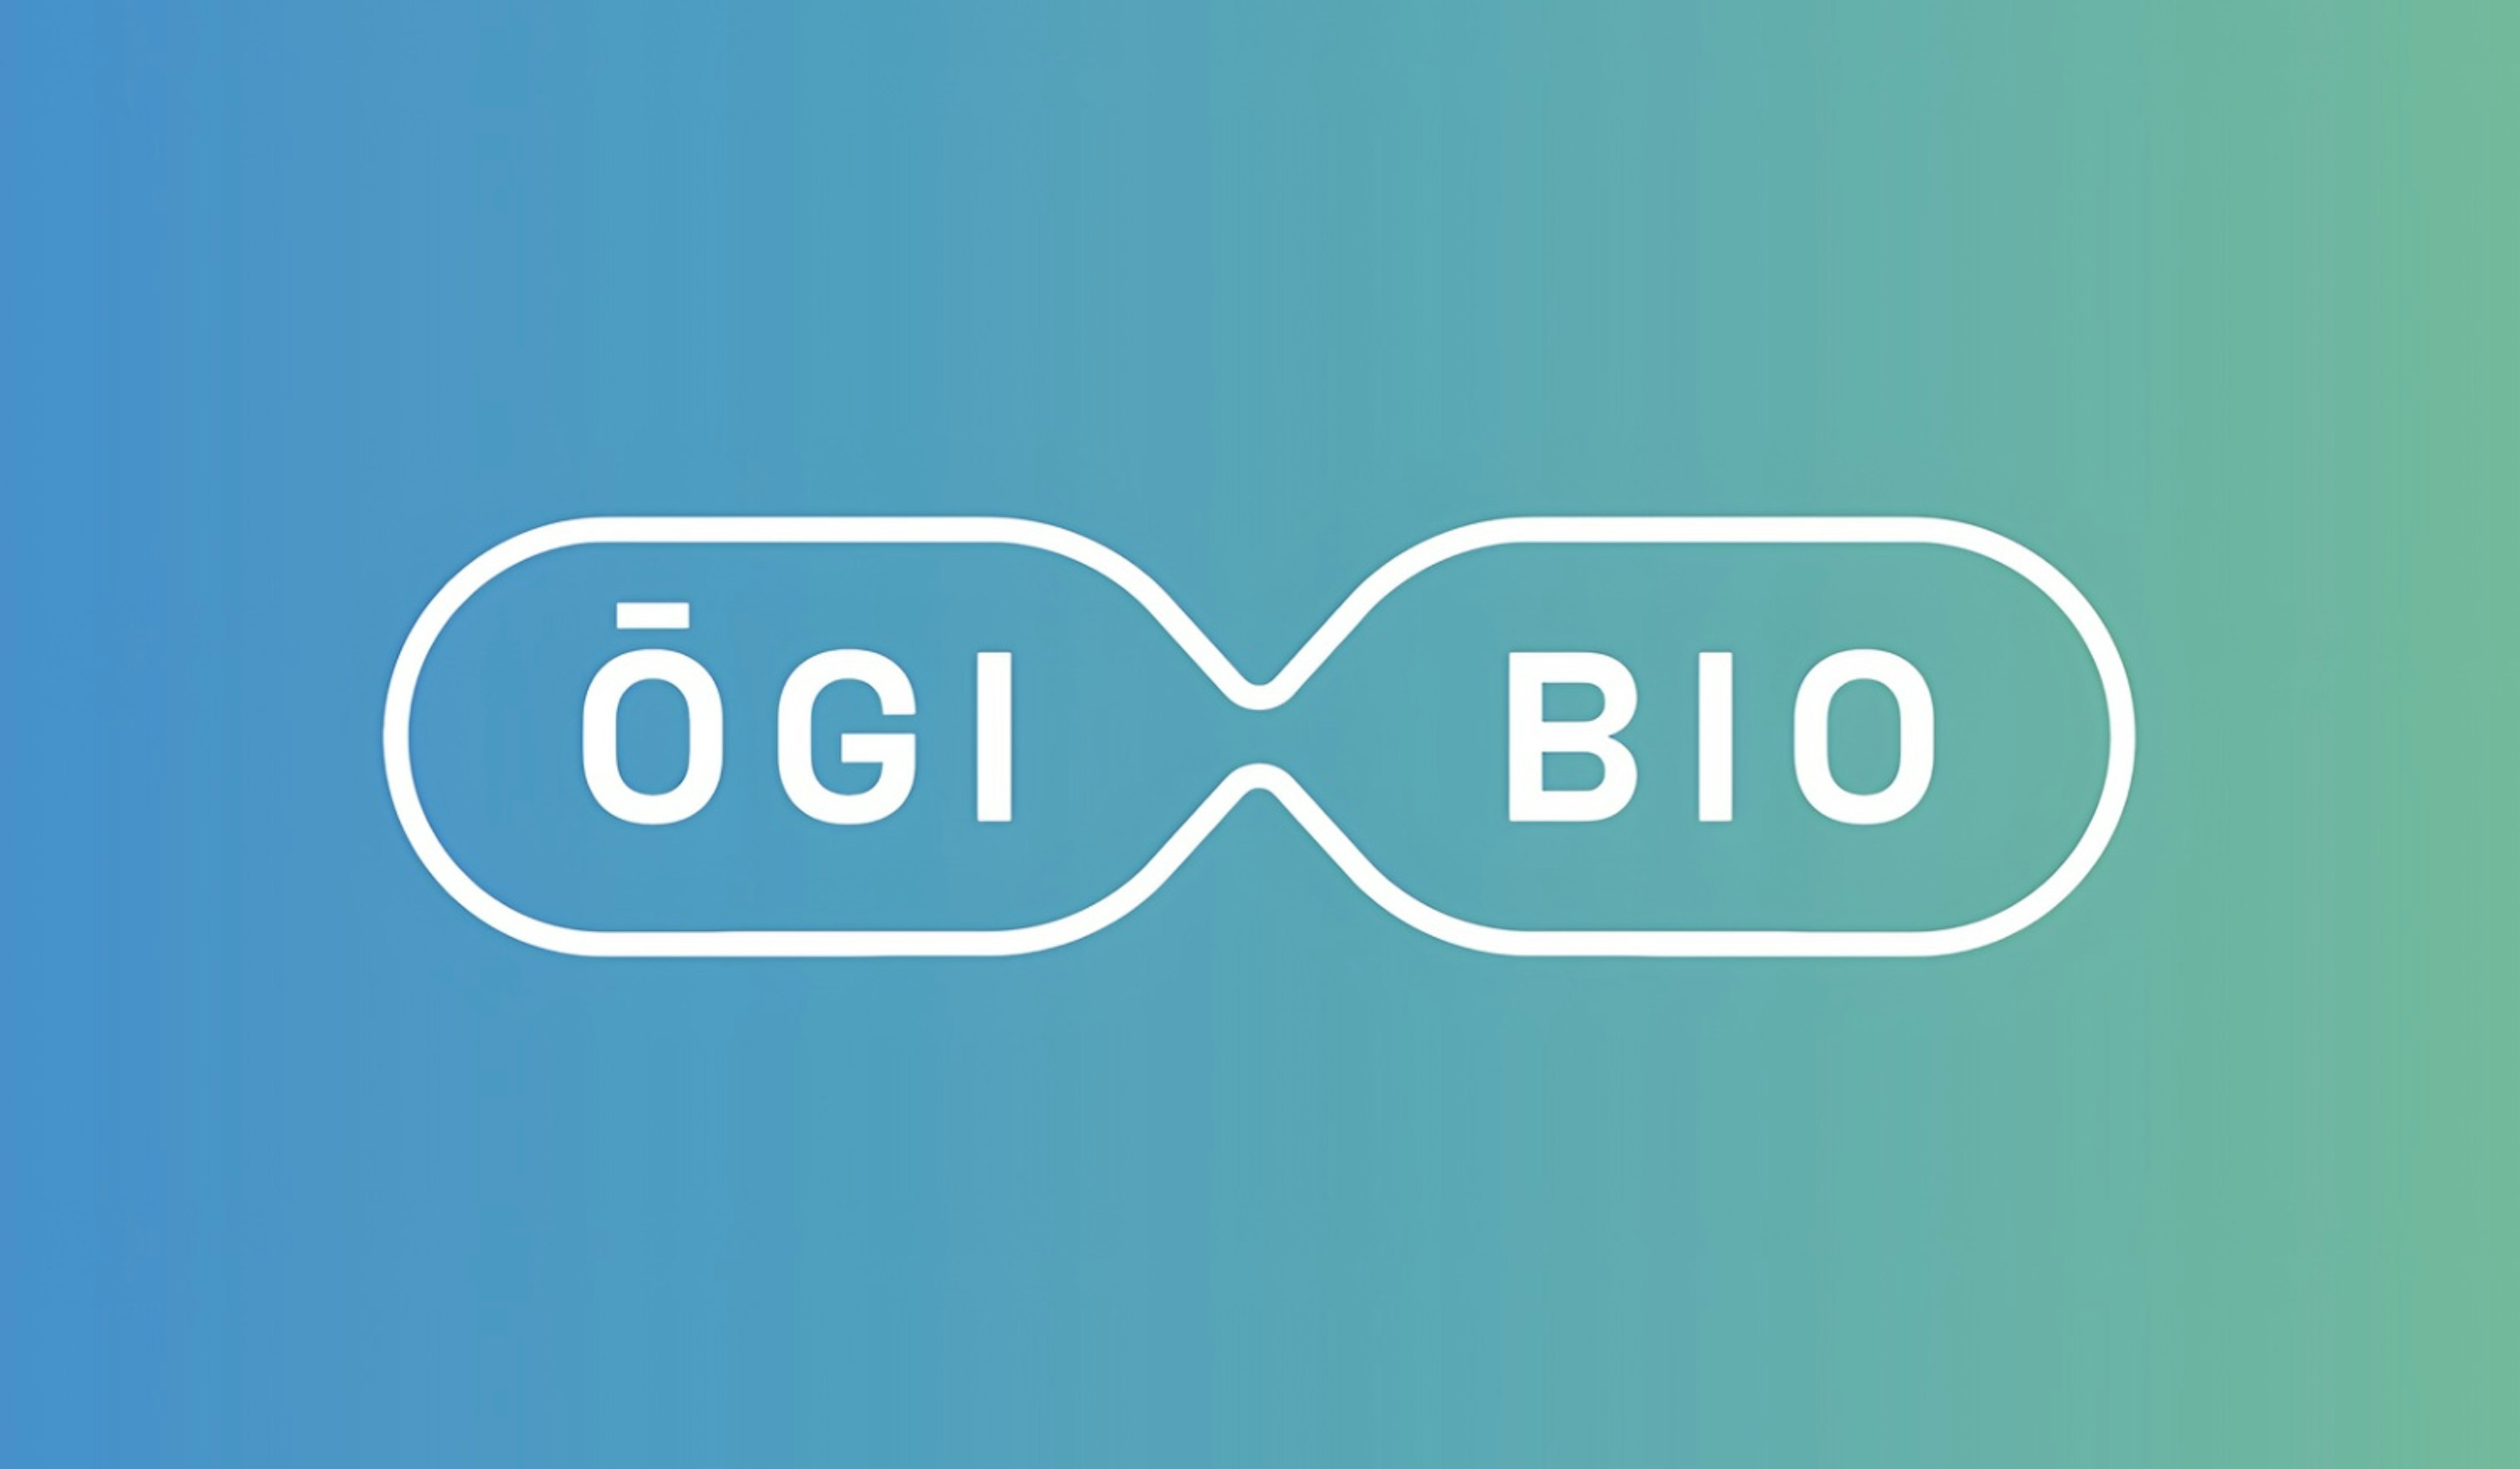 Edinburgh, Scotland – OGI Bio, an innovative company specialising in the automation of microbial culturing, has chosen Opvia as its Electronic Quality Management System (eQMS) provider.